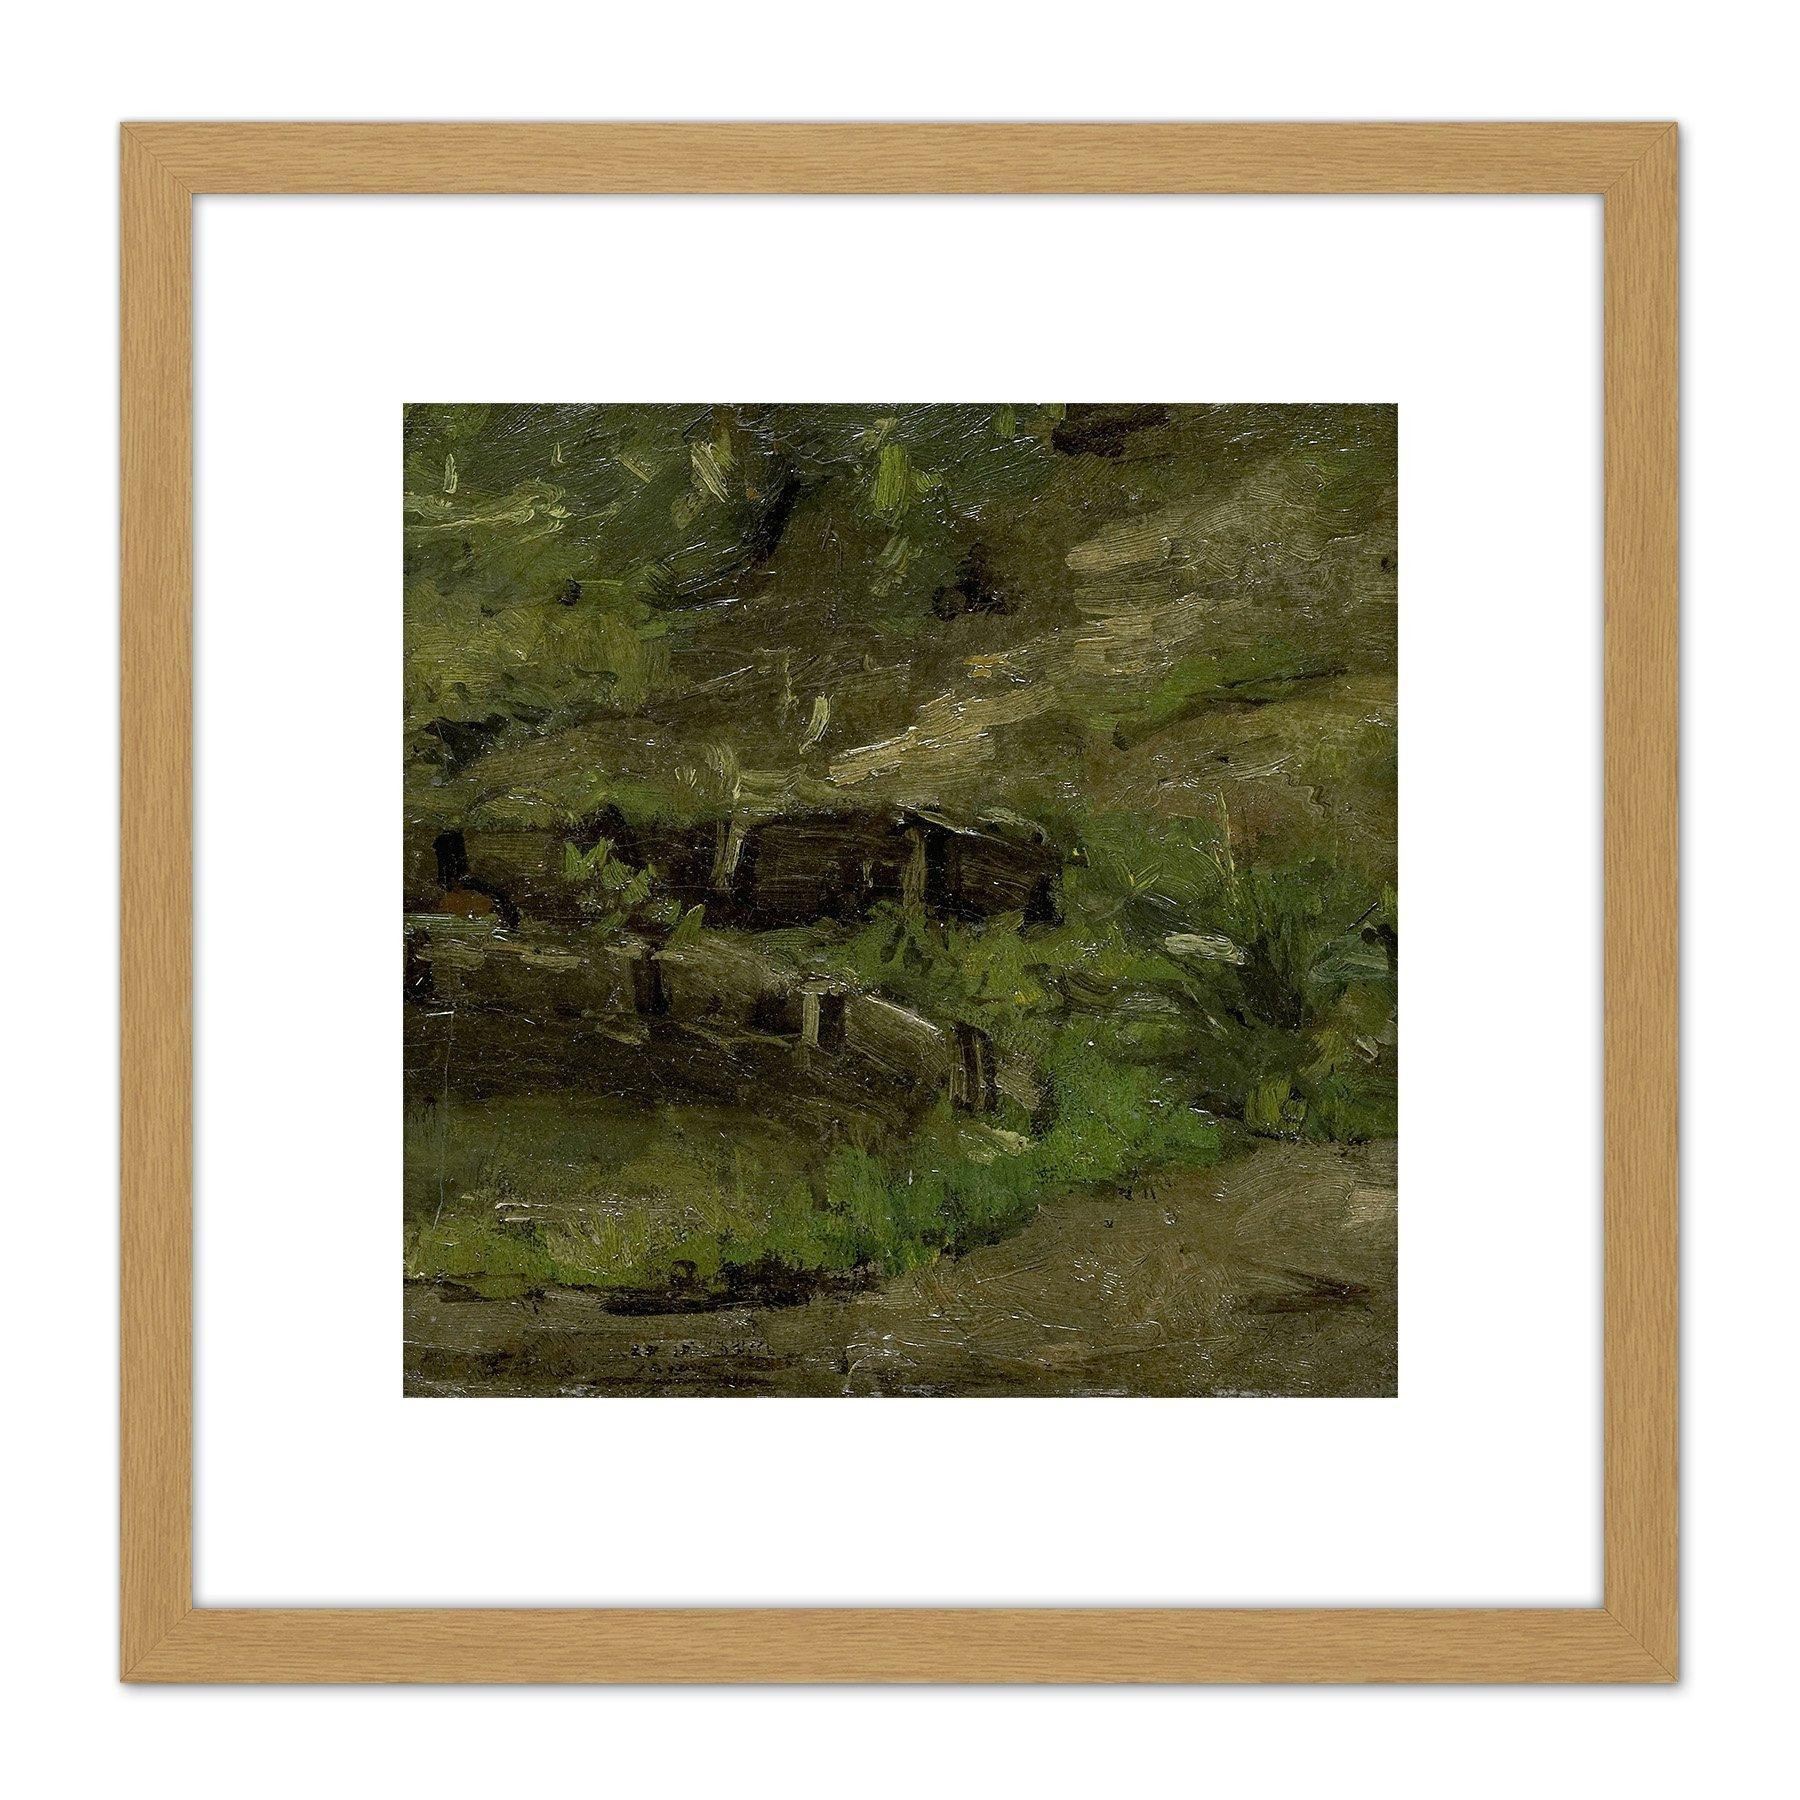 Breitner Meadow Landscape Nature Painting 8X8 Inch Square Wooden Framed Wall Art Print Picture with Mount - image 1